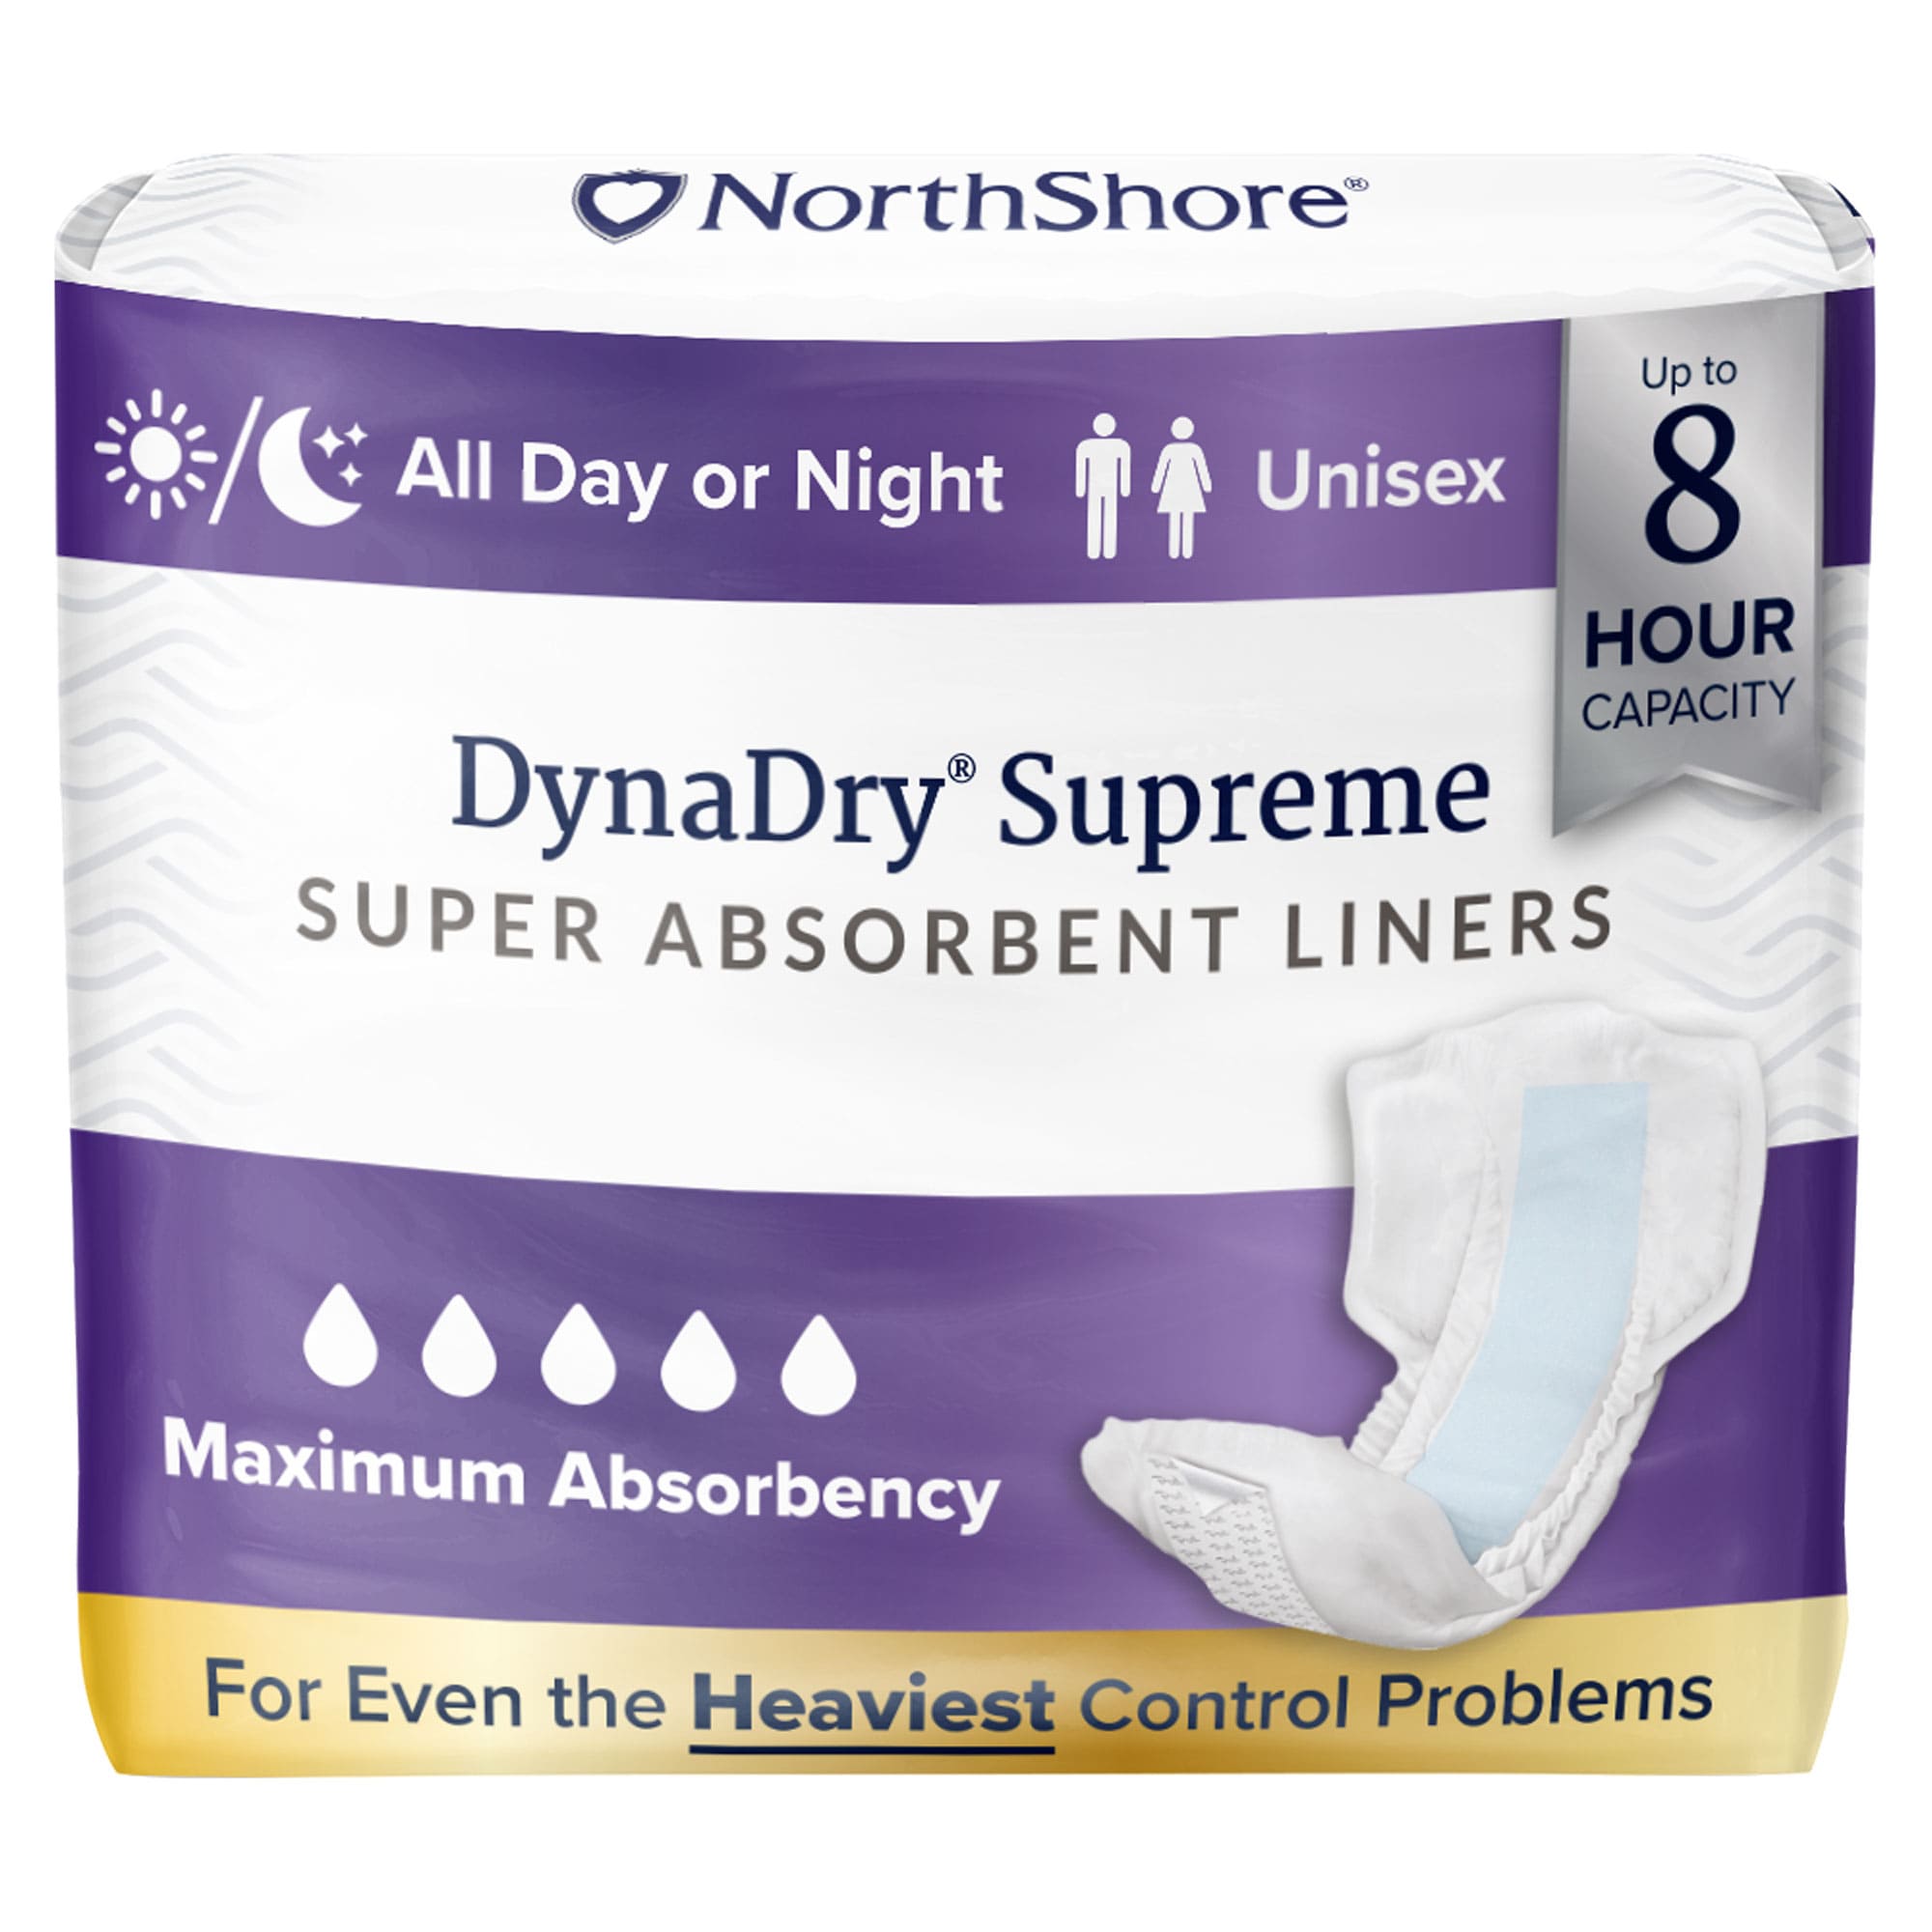 NorthShore DynaDry Supreme Heavy Unisex Incontinence Liners